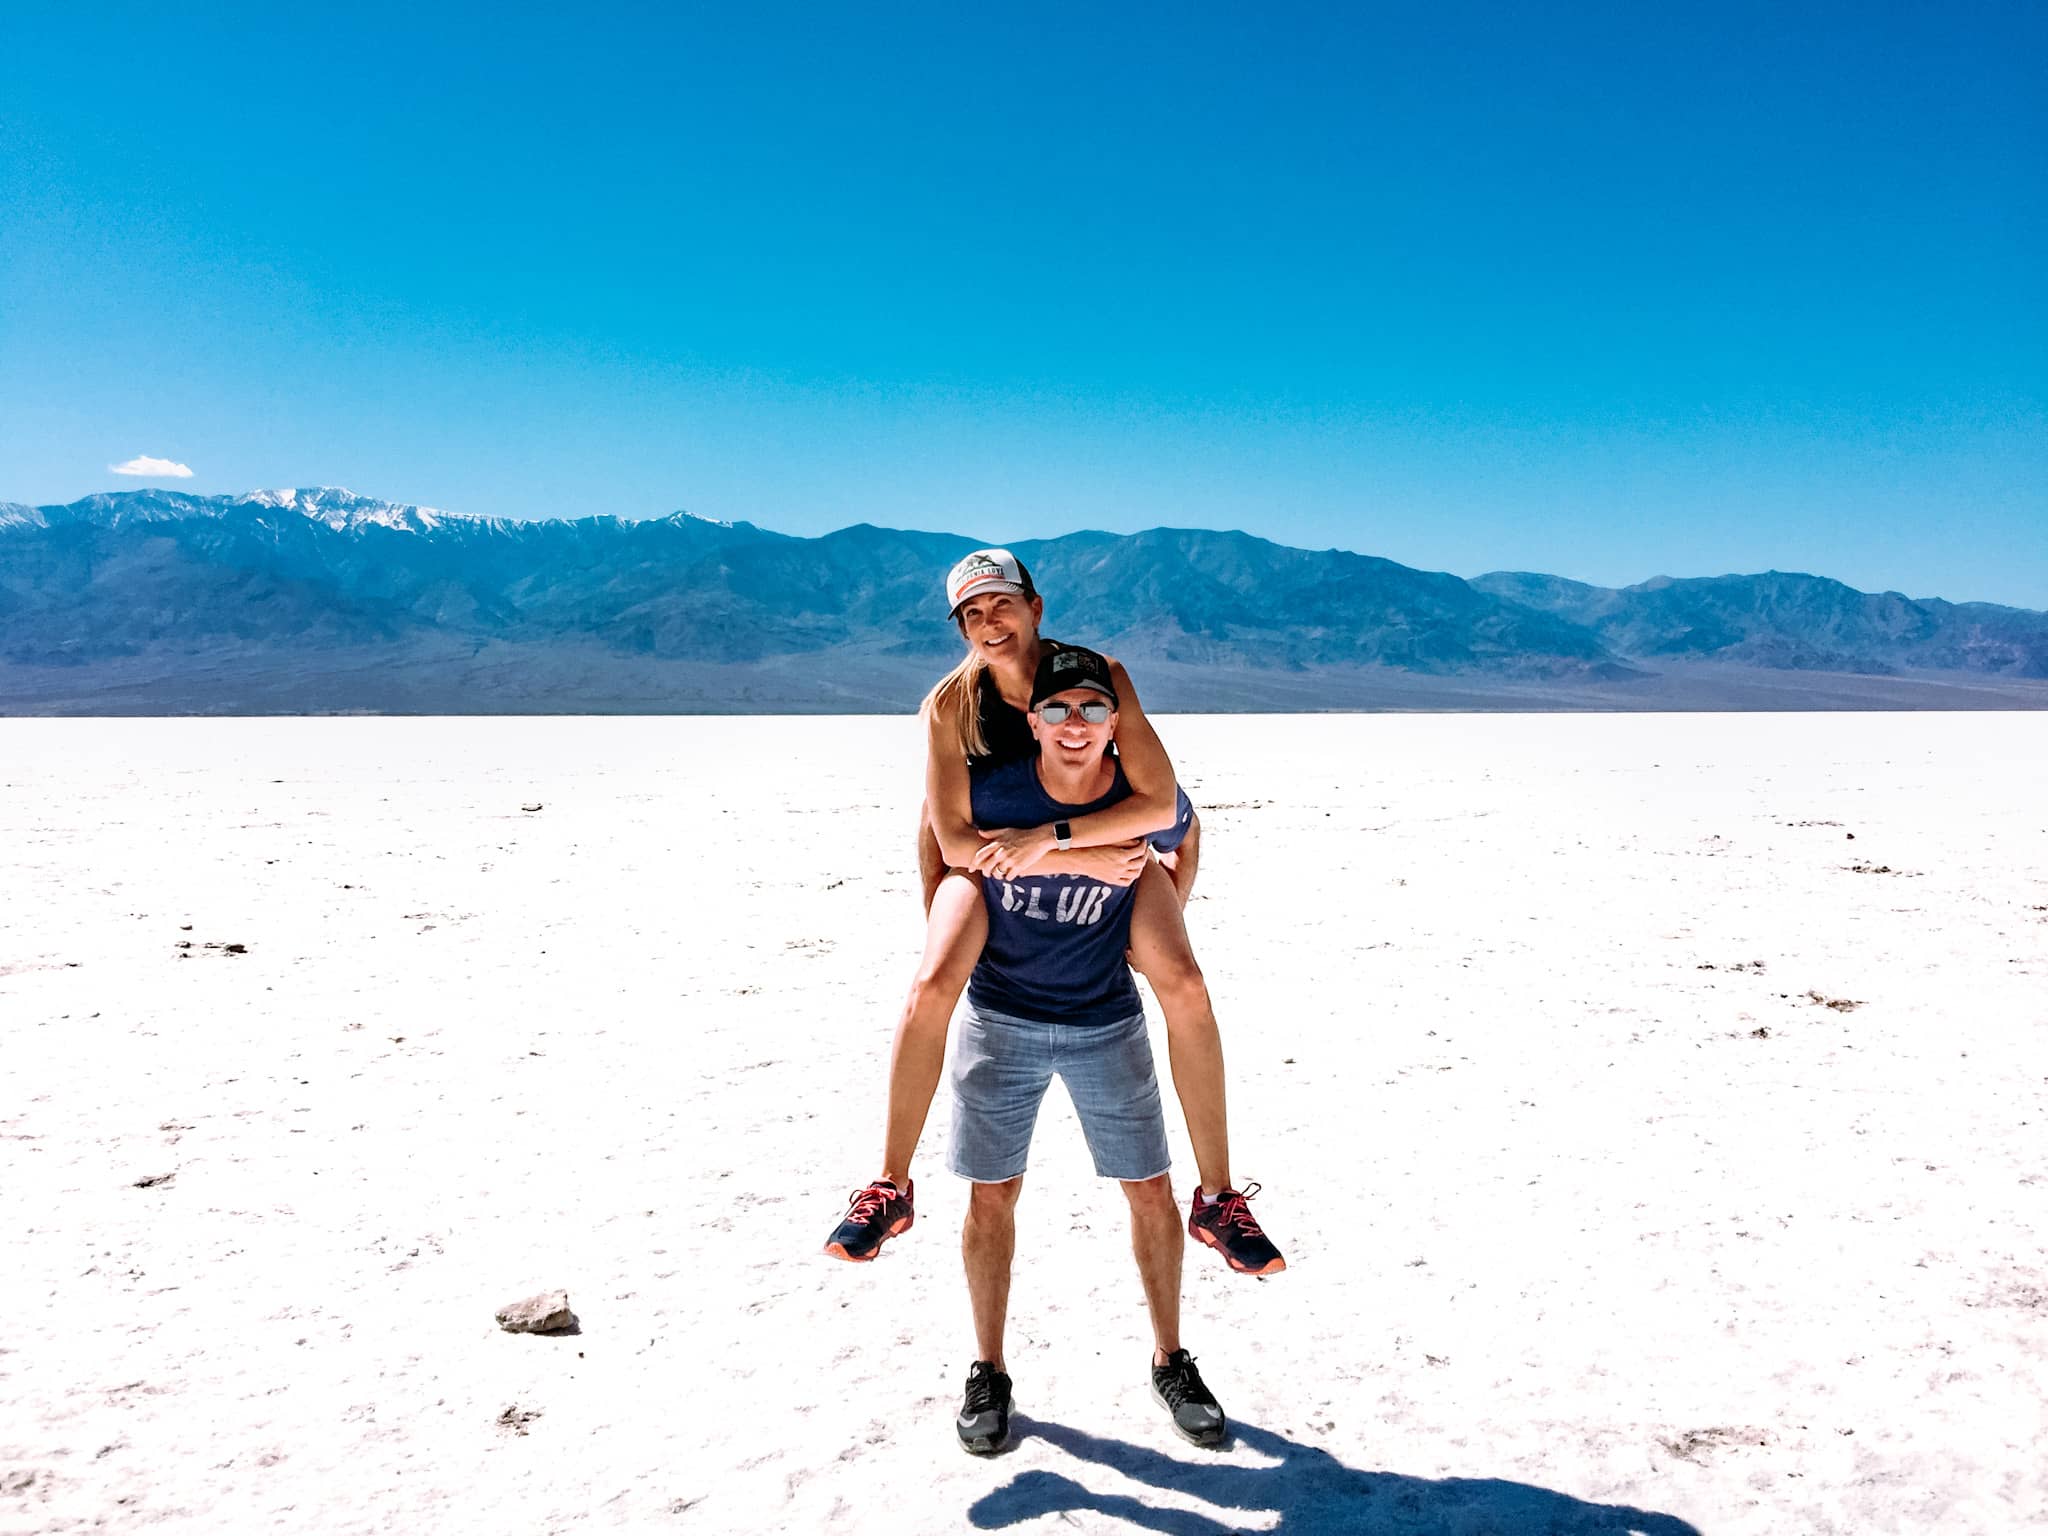 Death Valley Captions And Quotes For Instagram